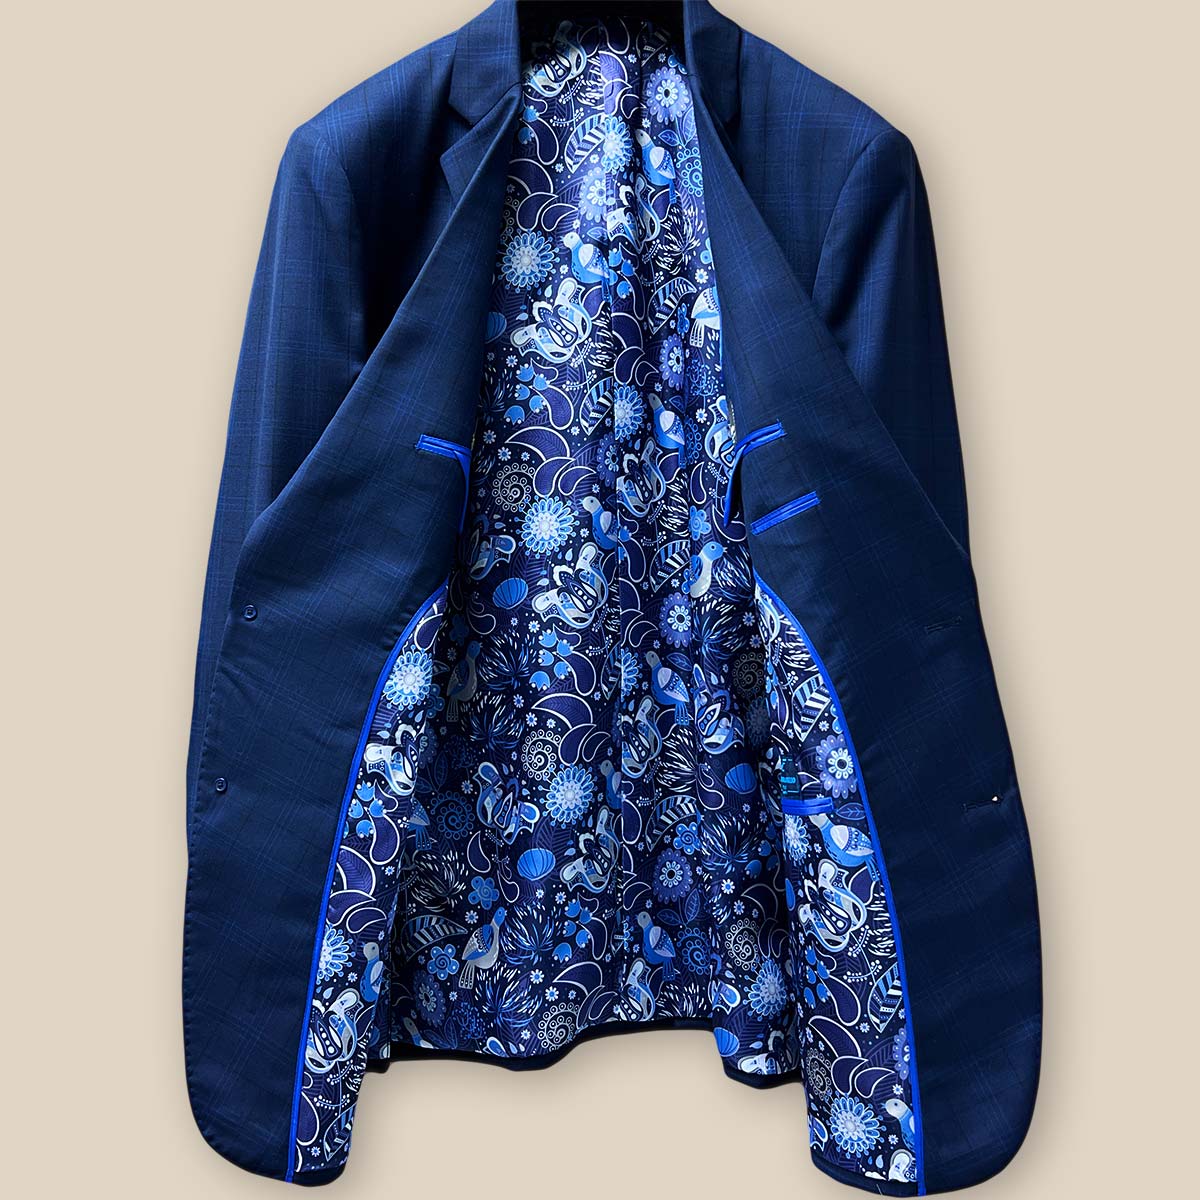 Full view of the interior lining of the dark blue windowpane men's sport coat with blue and white aviary motif flash lining and royal blue piping.